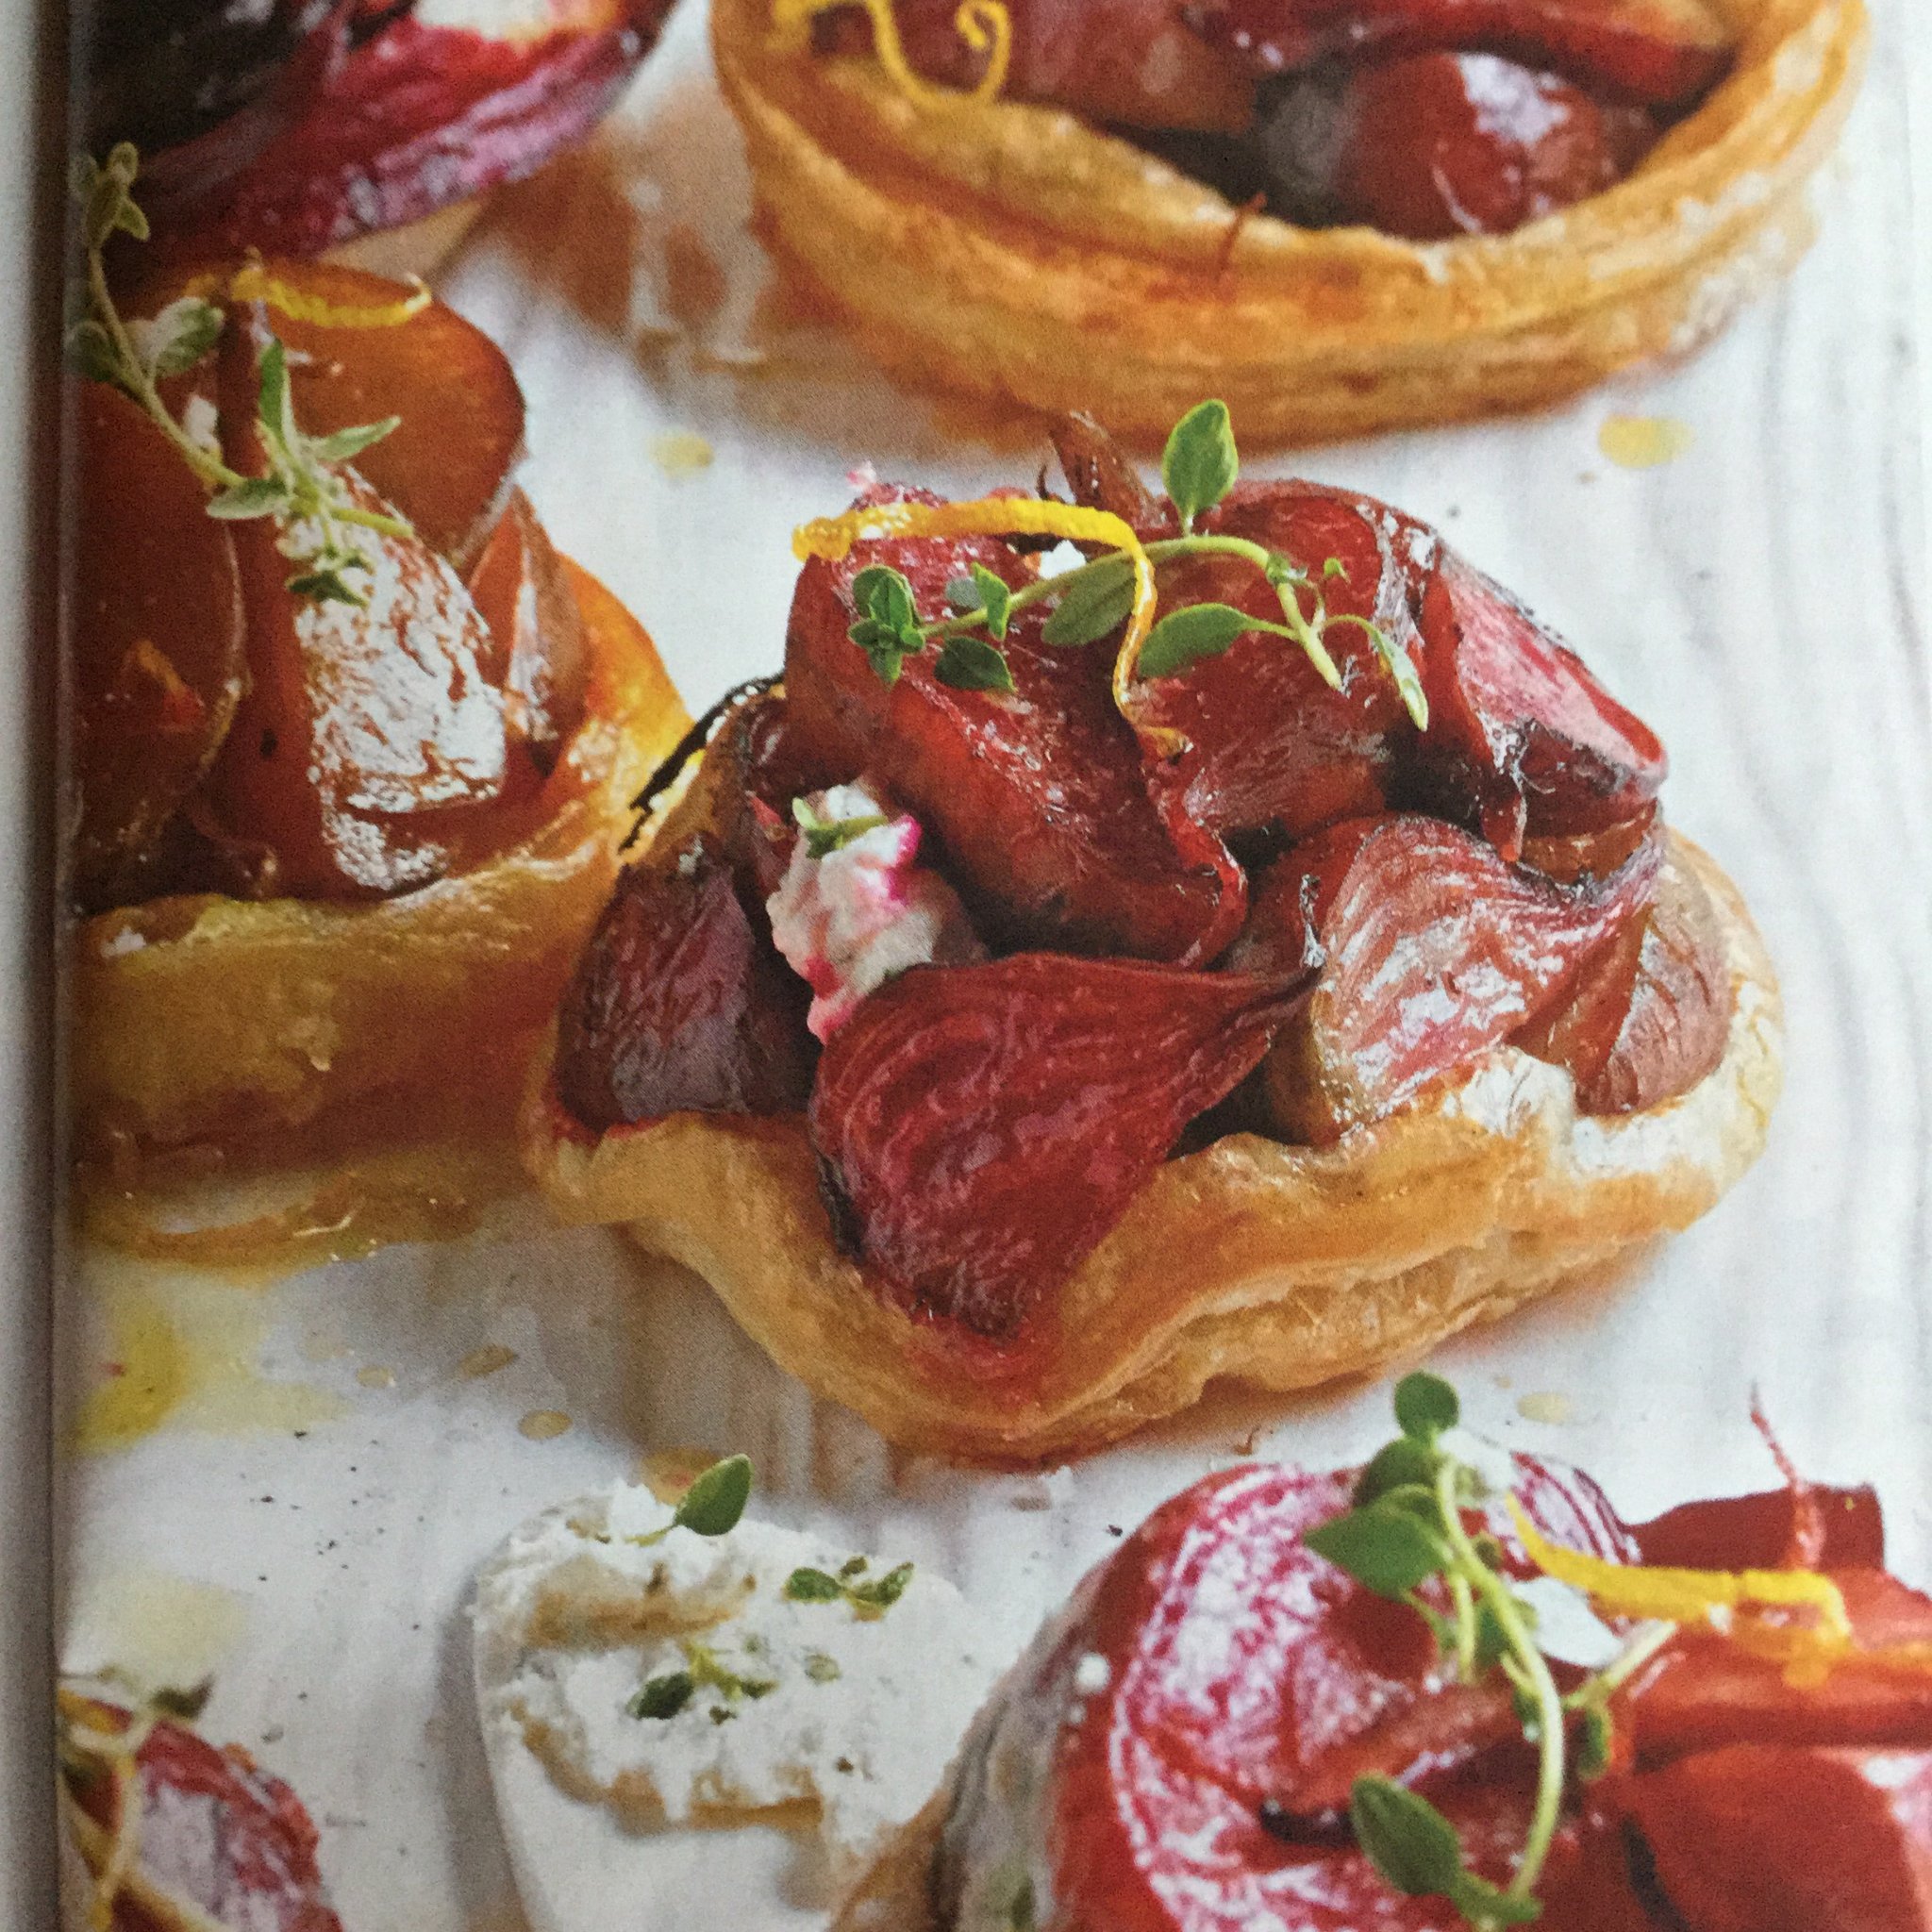 Savory Tarts Topped with Lemony Beets